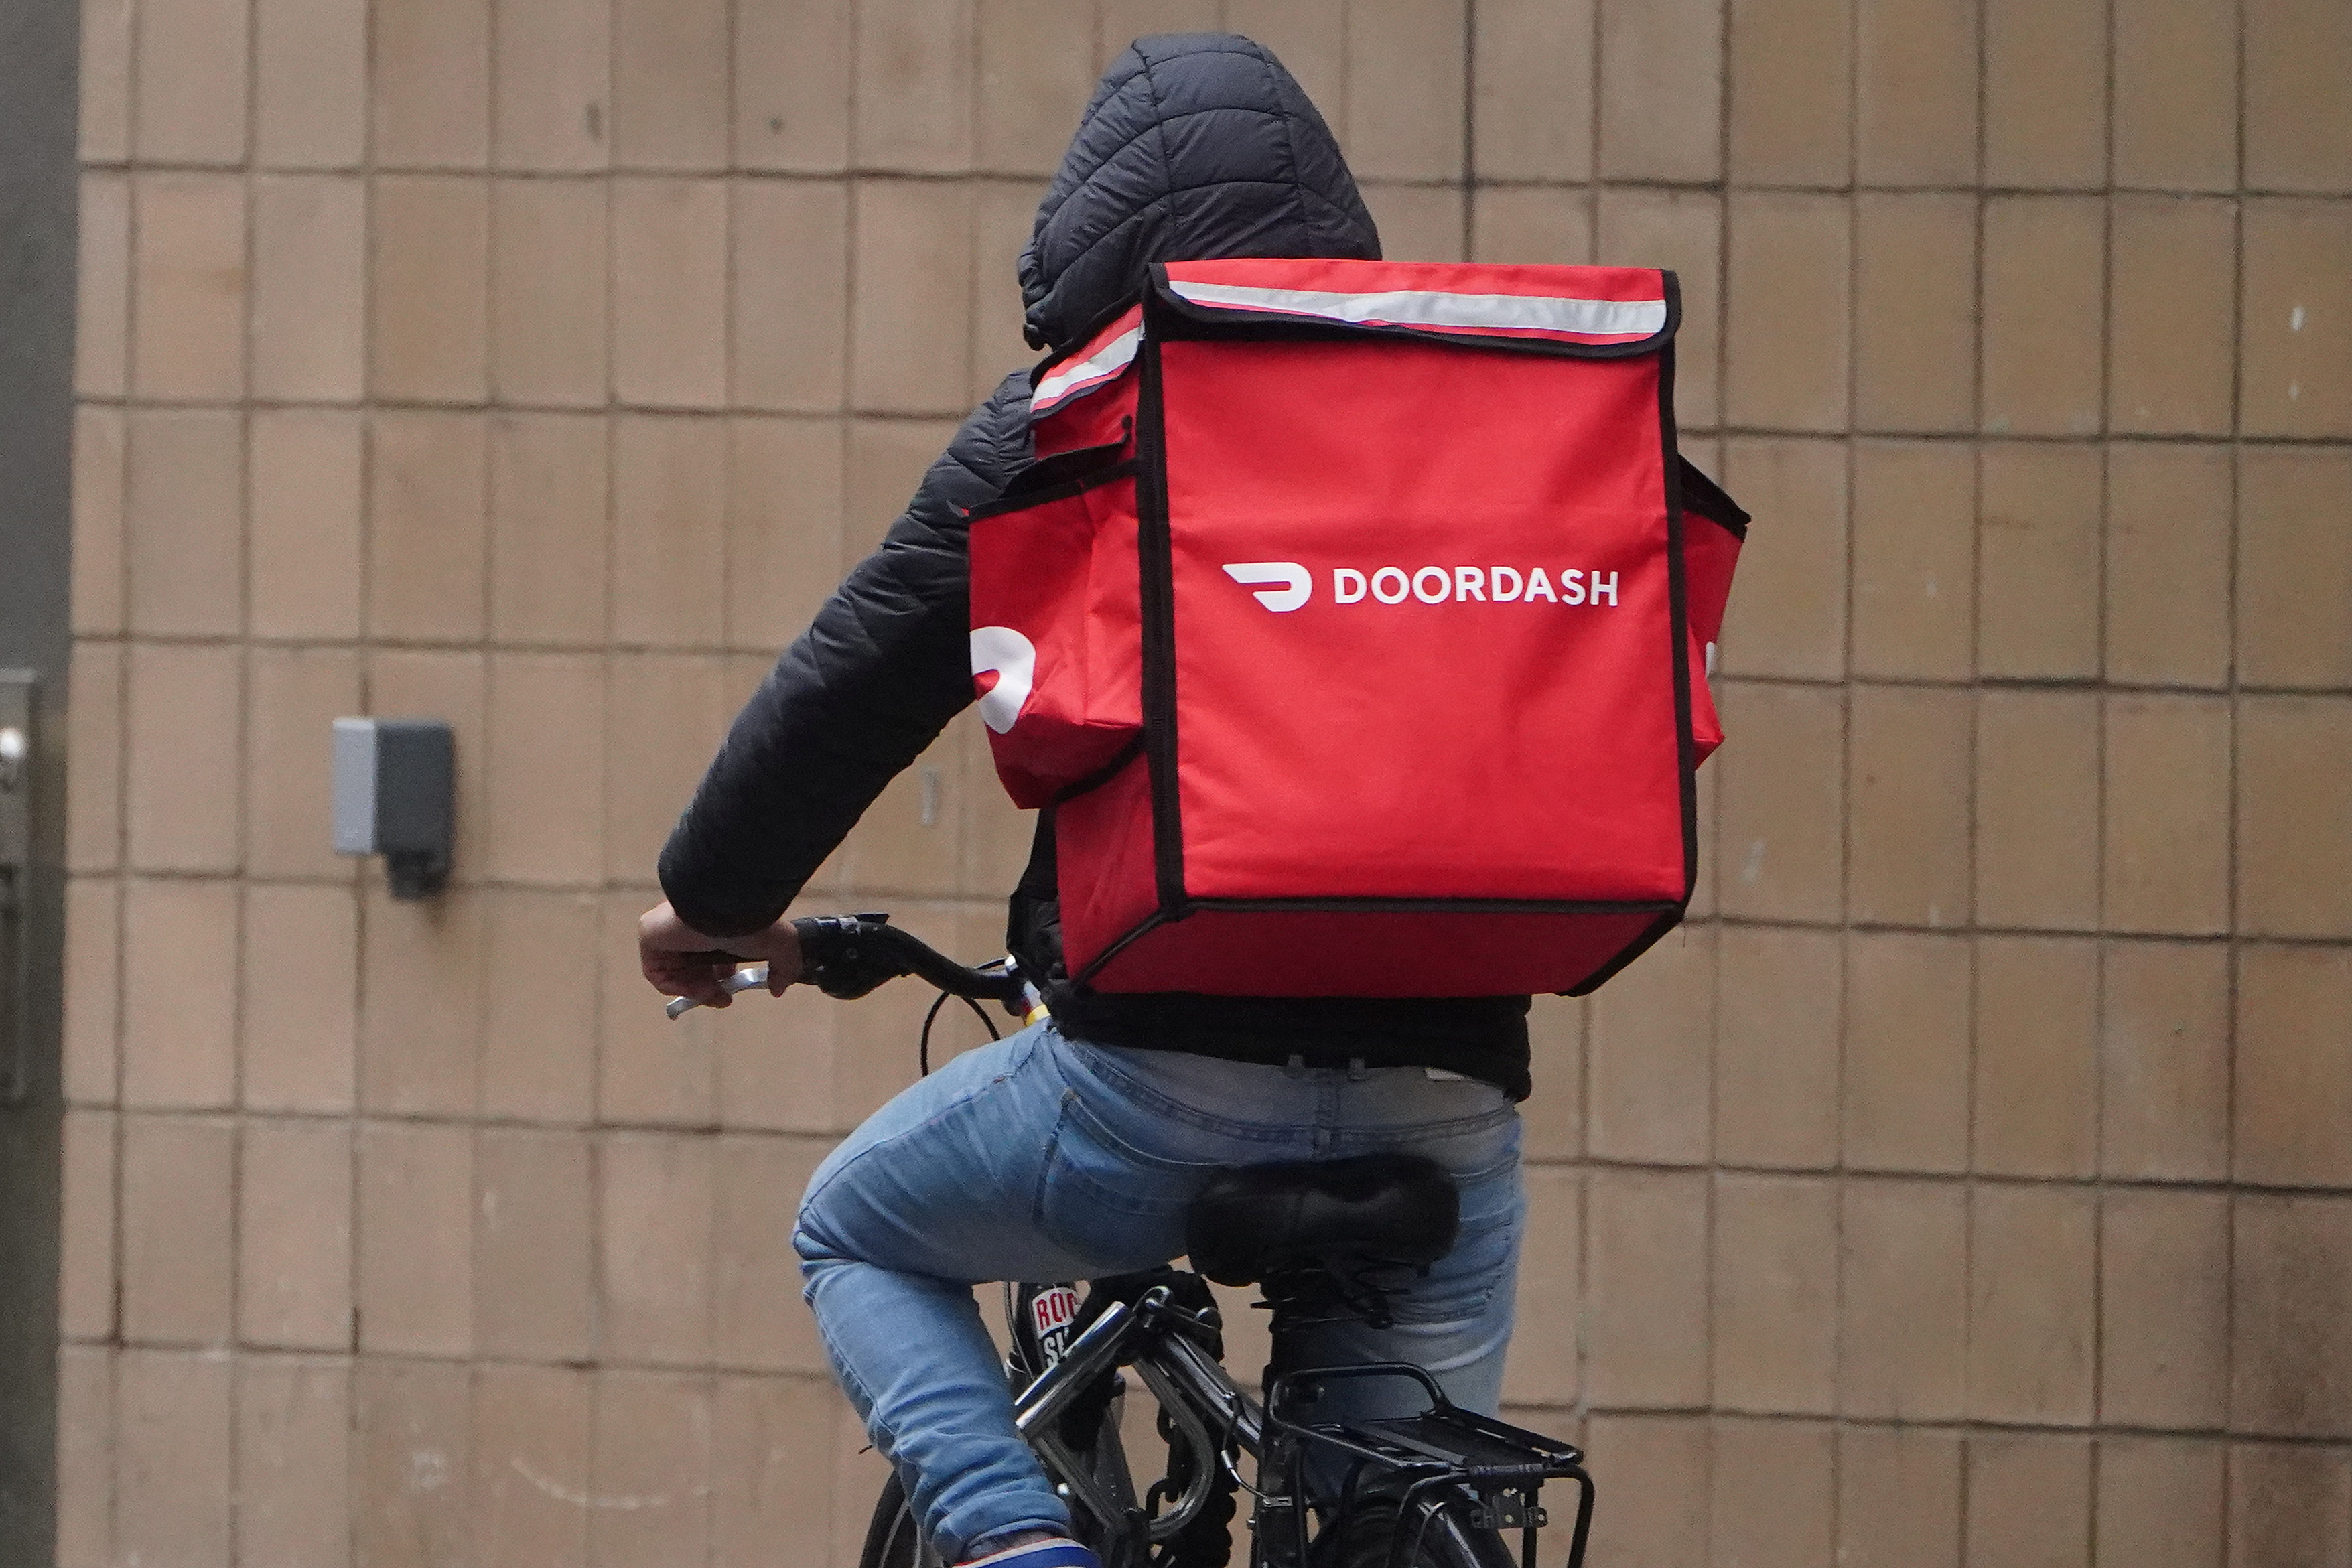 DoorDash couriers will have to scan a customer's ID before delivering alcohol